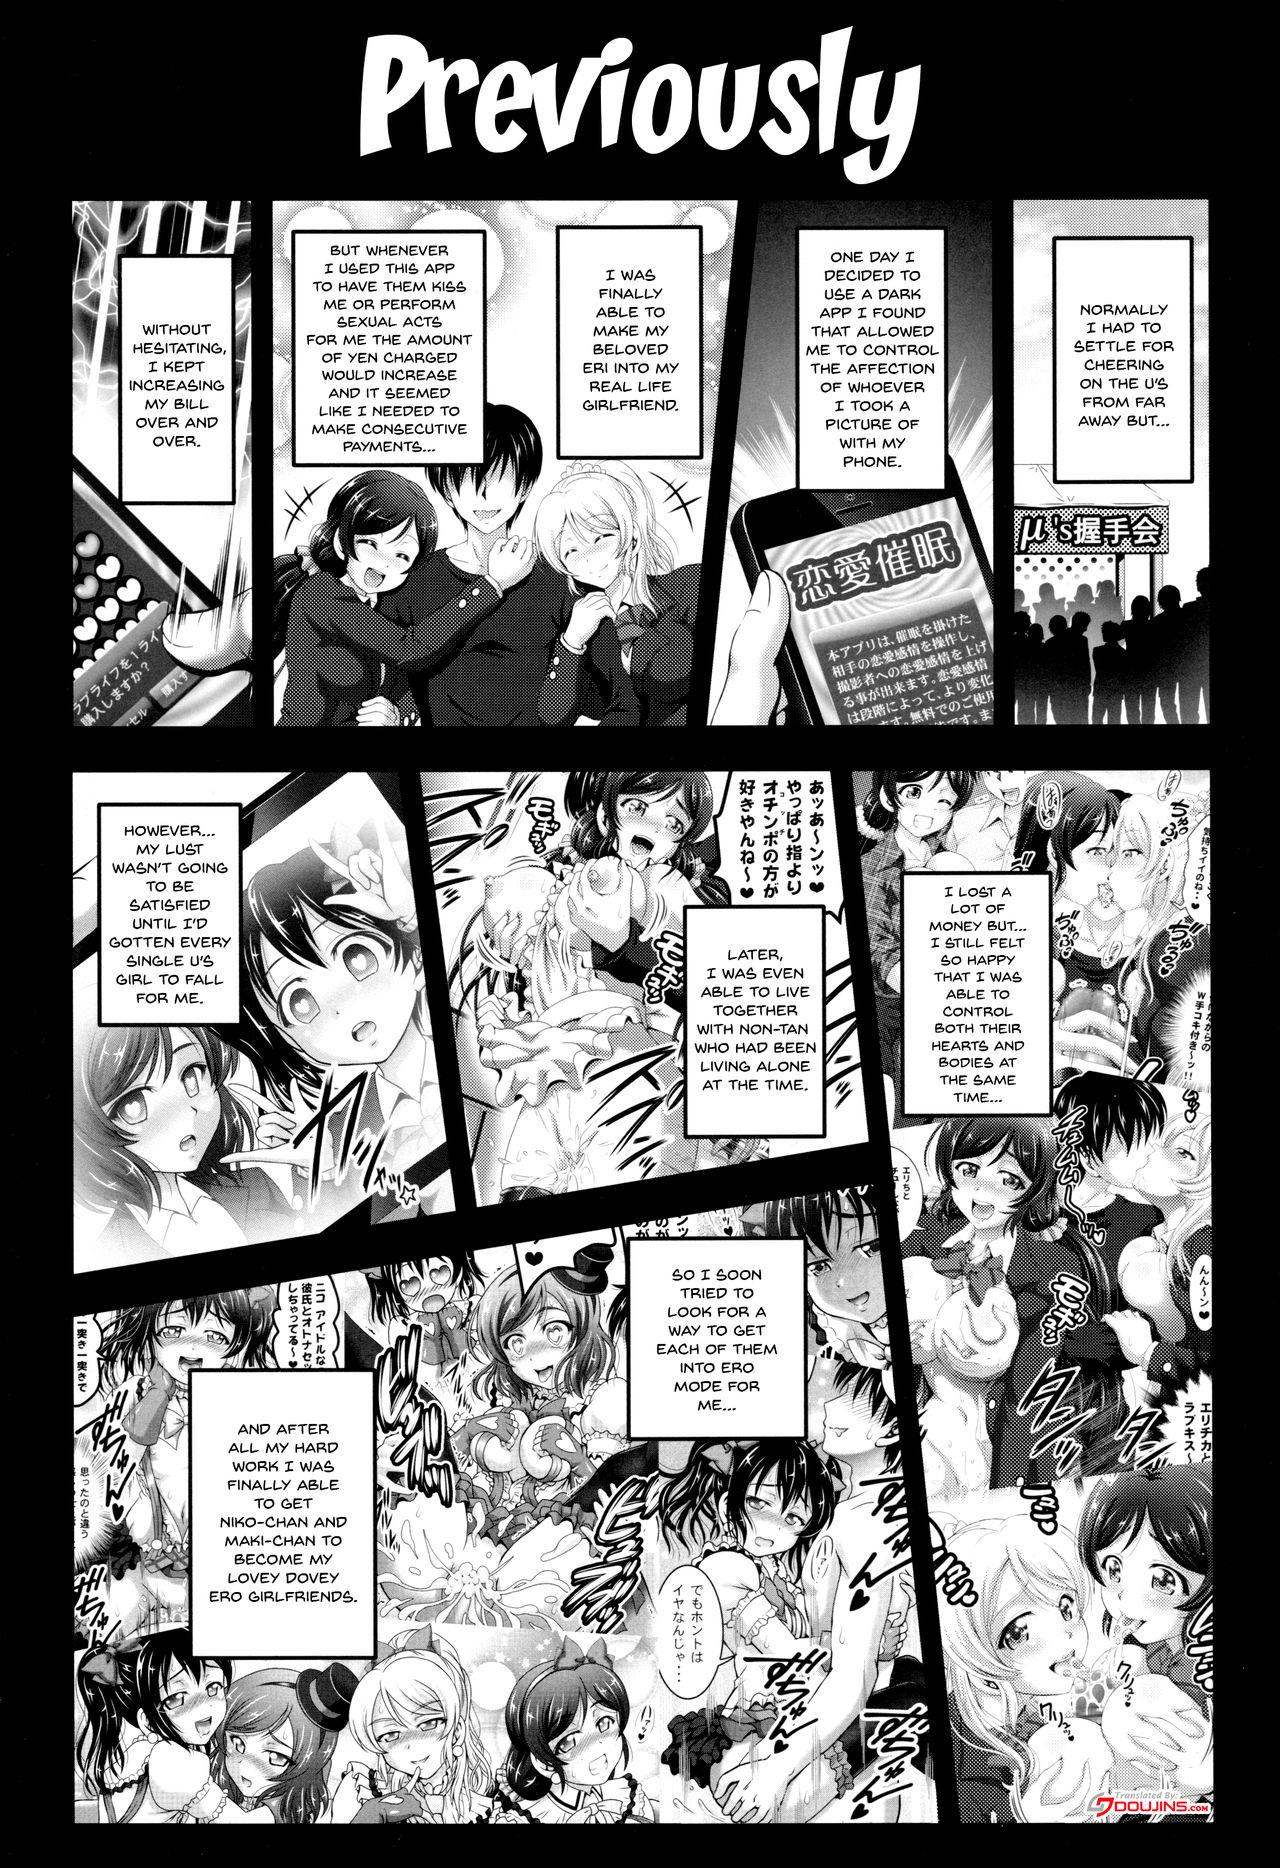 Adolescente Ore Yome Saimin 4 | My Wife Hypnosis 4 - Love live Nylons - Page 2